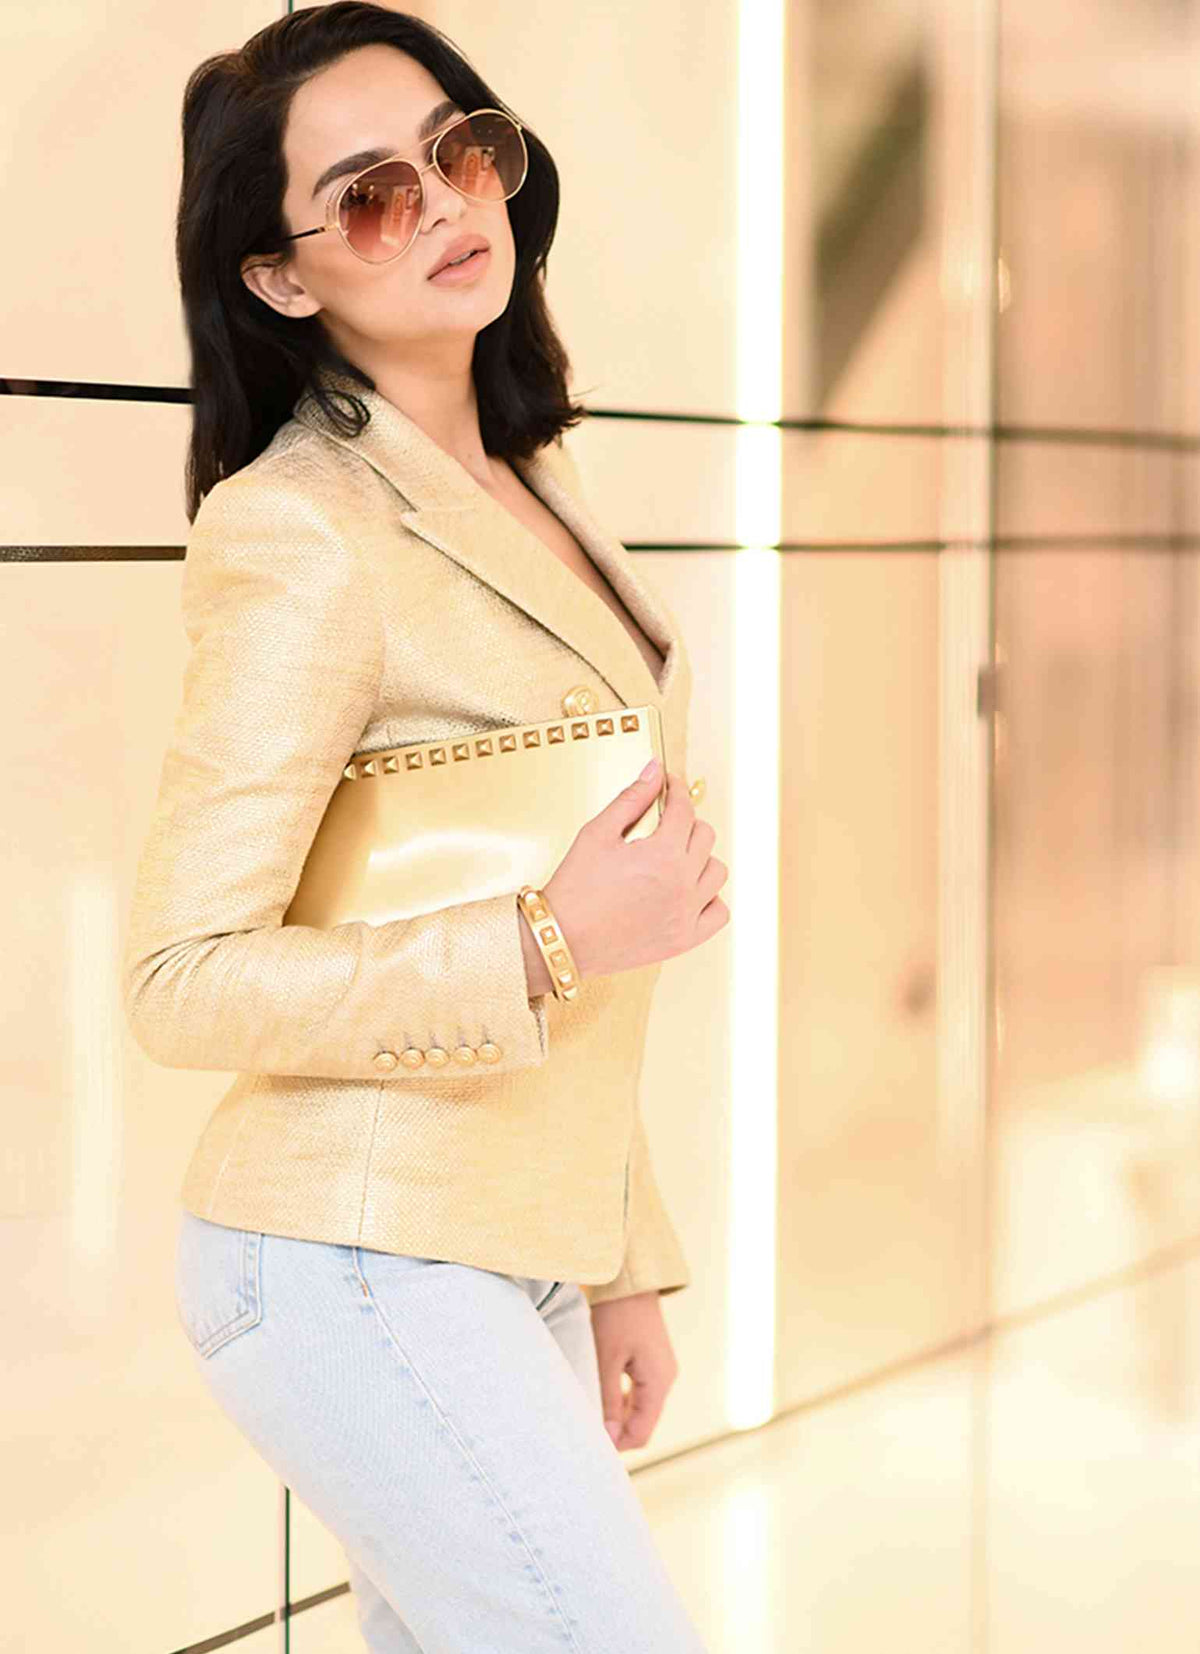 Women wearing a gold color bag with gold bracelets with studs